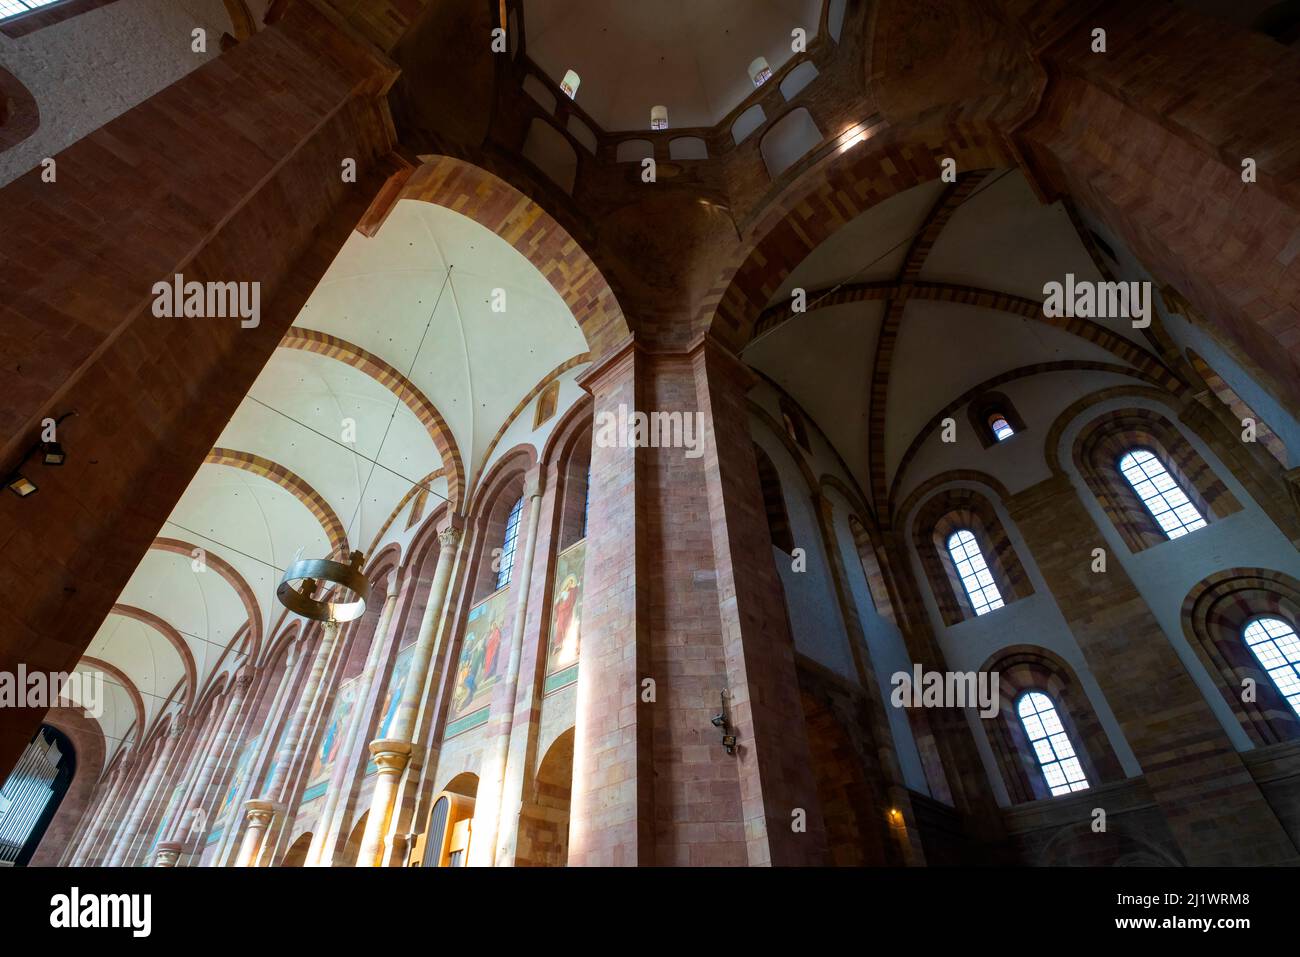 Inside the famous Speyer Cathedral in Rhineland-Palatinate, Germany. Speyer is a city in Rhineland-Palatinate in Germany with approximately 50,000 inh Stock Photo